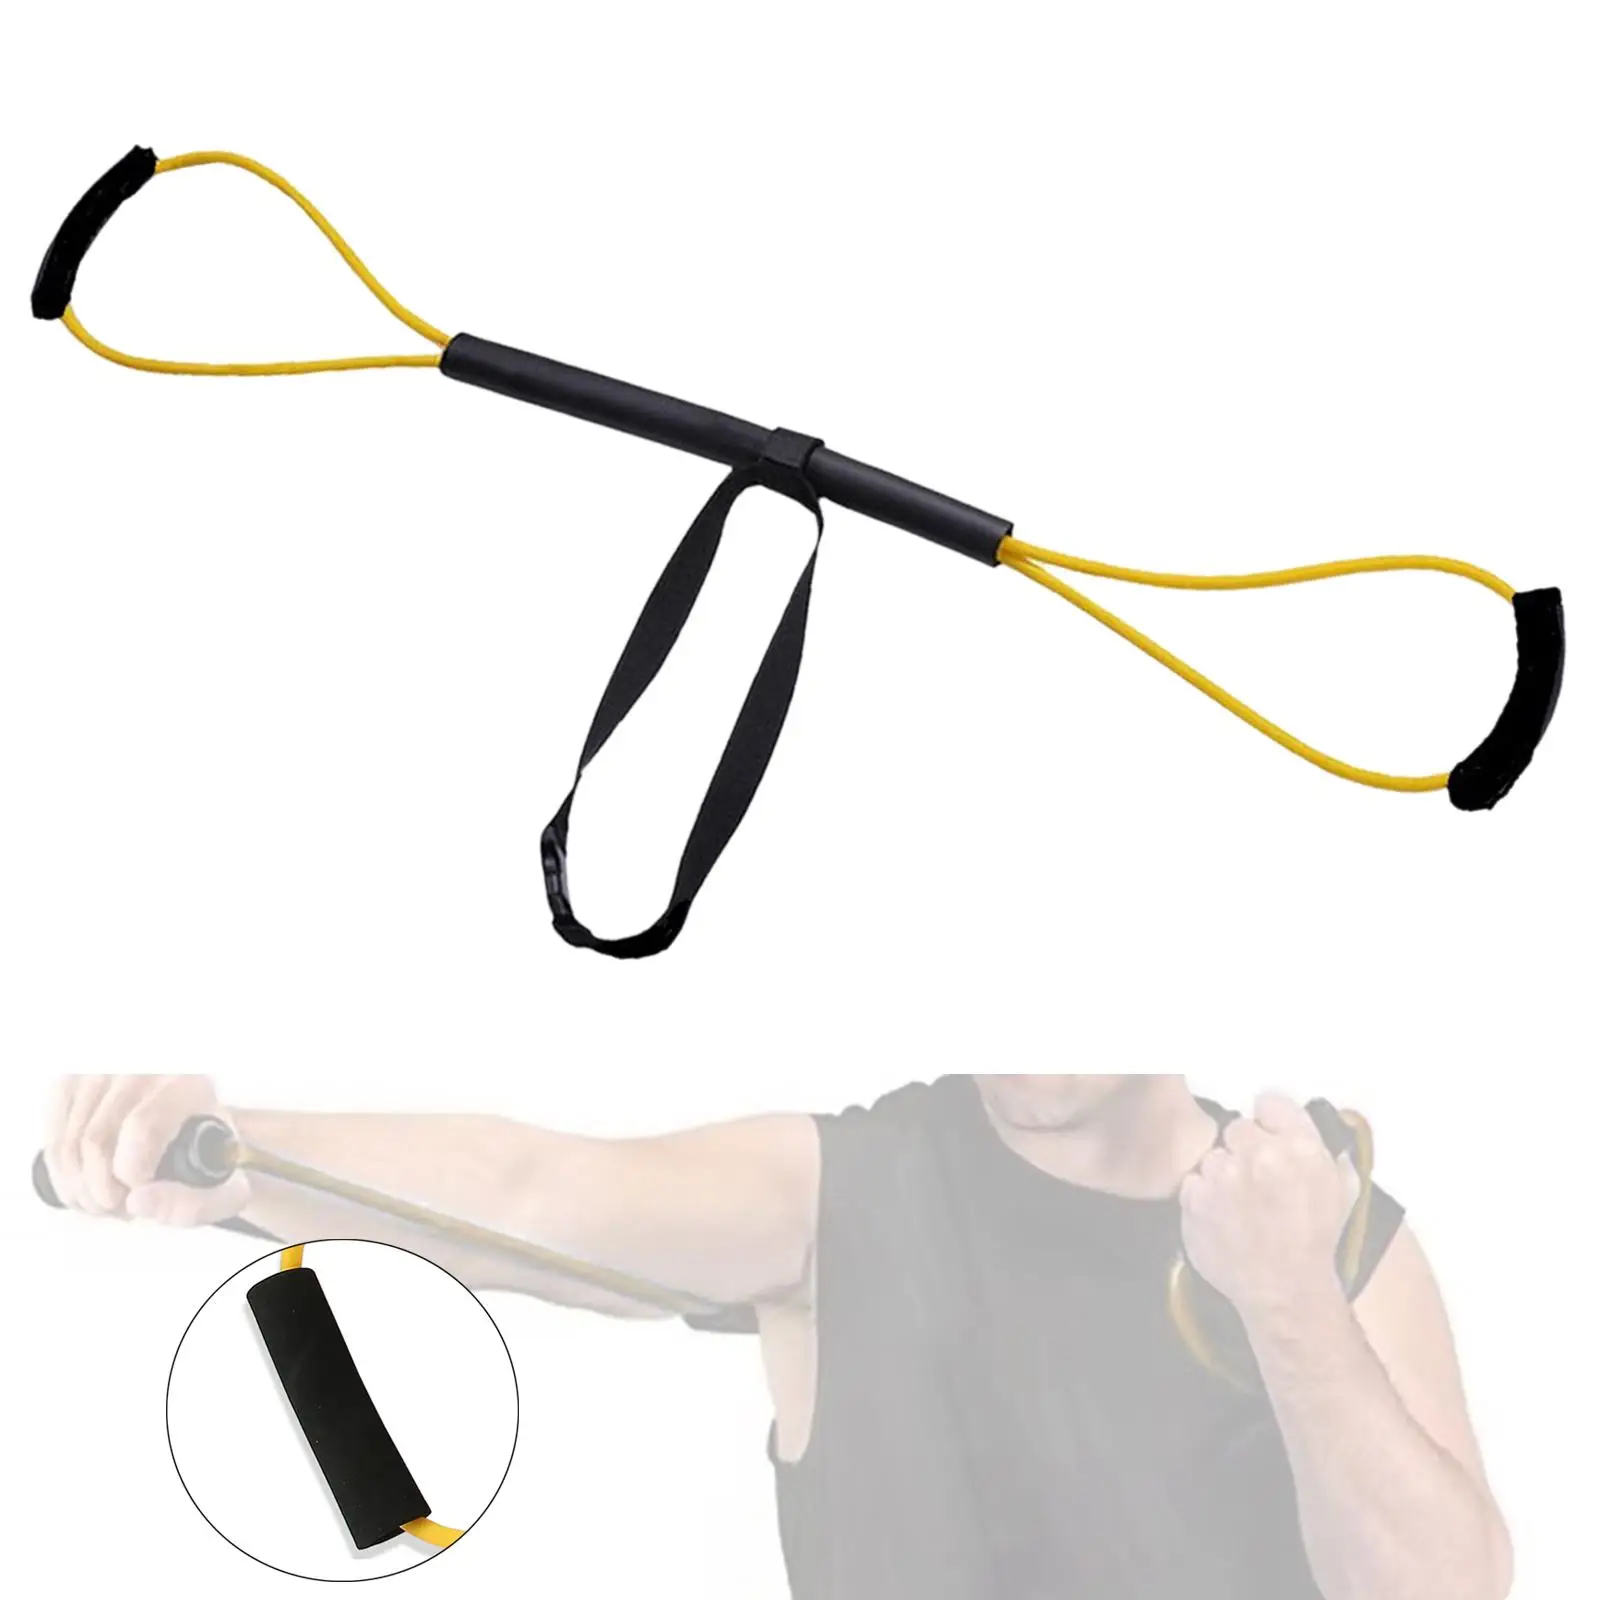 Boxing Resistance Bands for Shadow Boxing Mma Taekwondo Exercise Bands